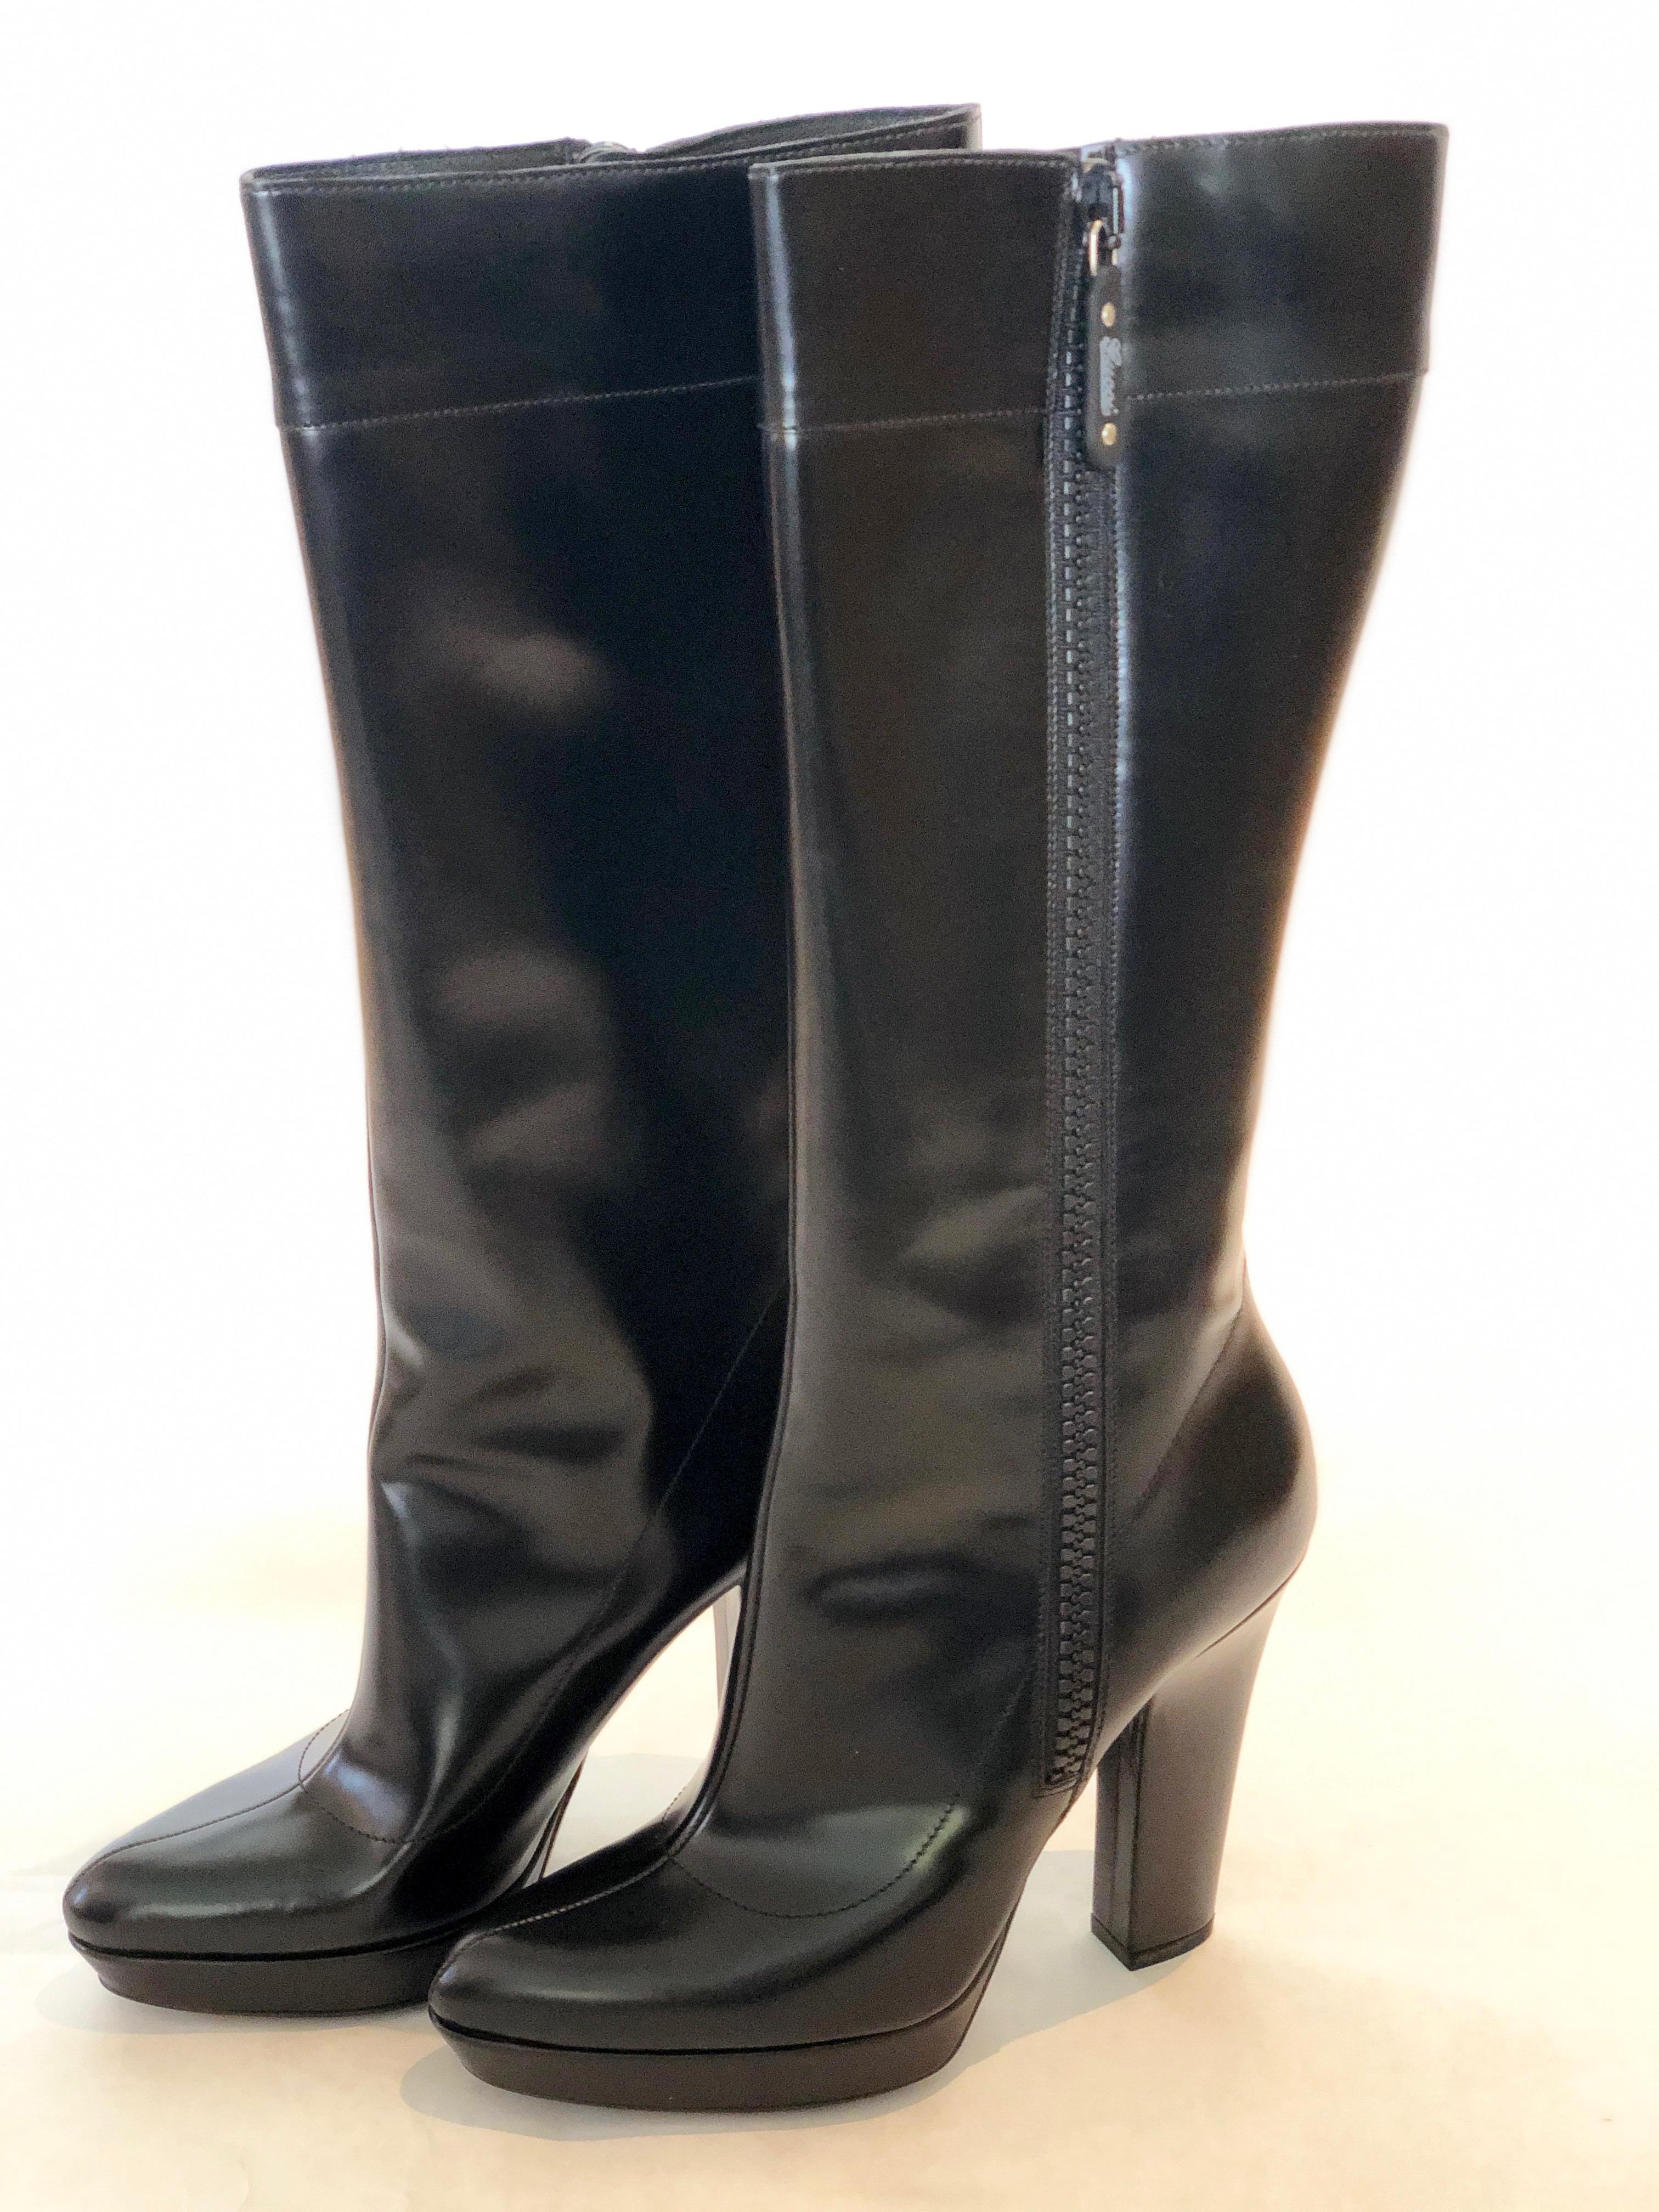 Pair of Gucci Shiny Black Side Zip Pointy Toe Platform and Heeled Knee Boots For Sale 4